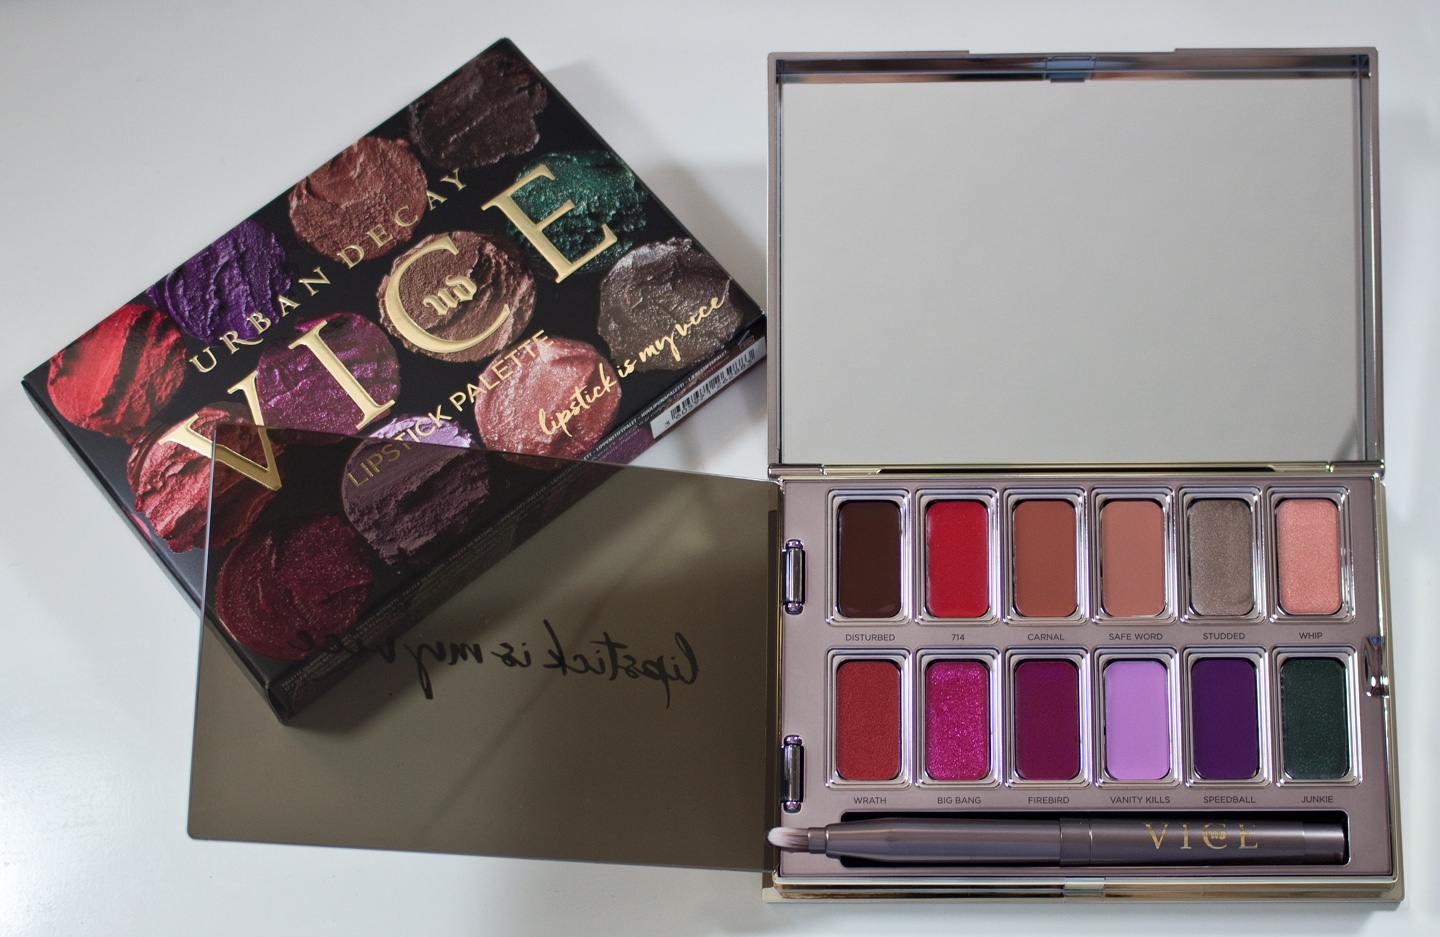 Urban Decay Junkie Vice Lipstick Palette with Disturbed, 714, Carnal, Safe ...